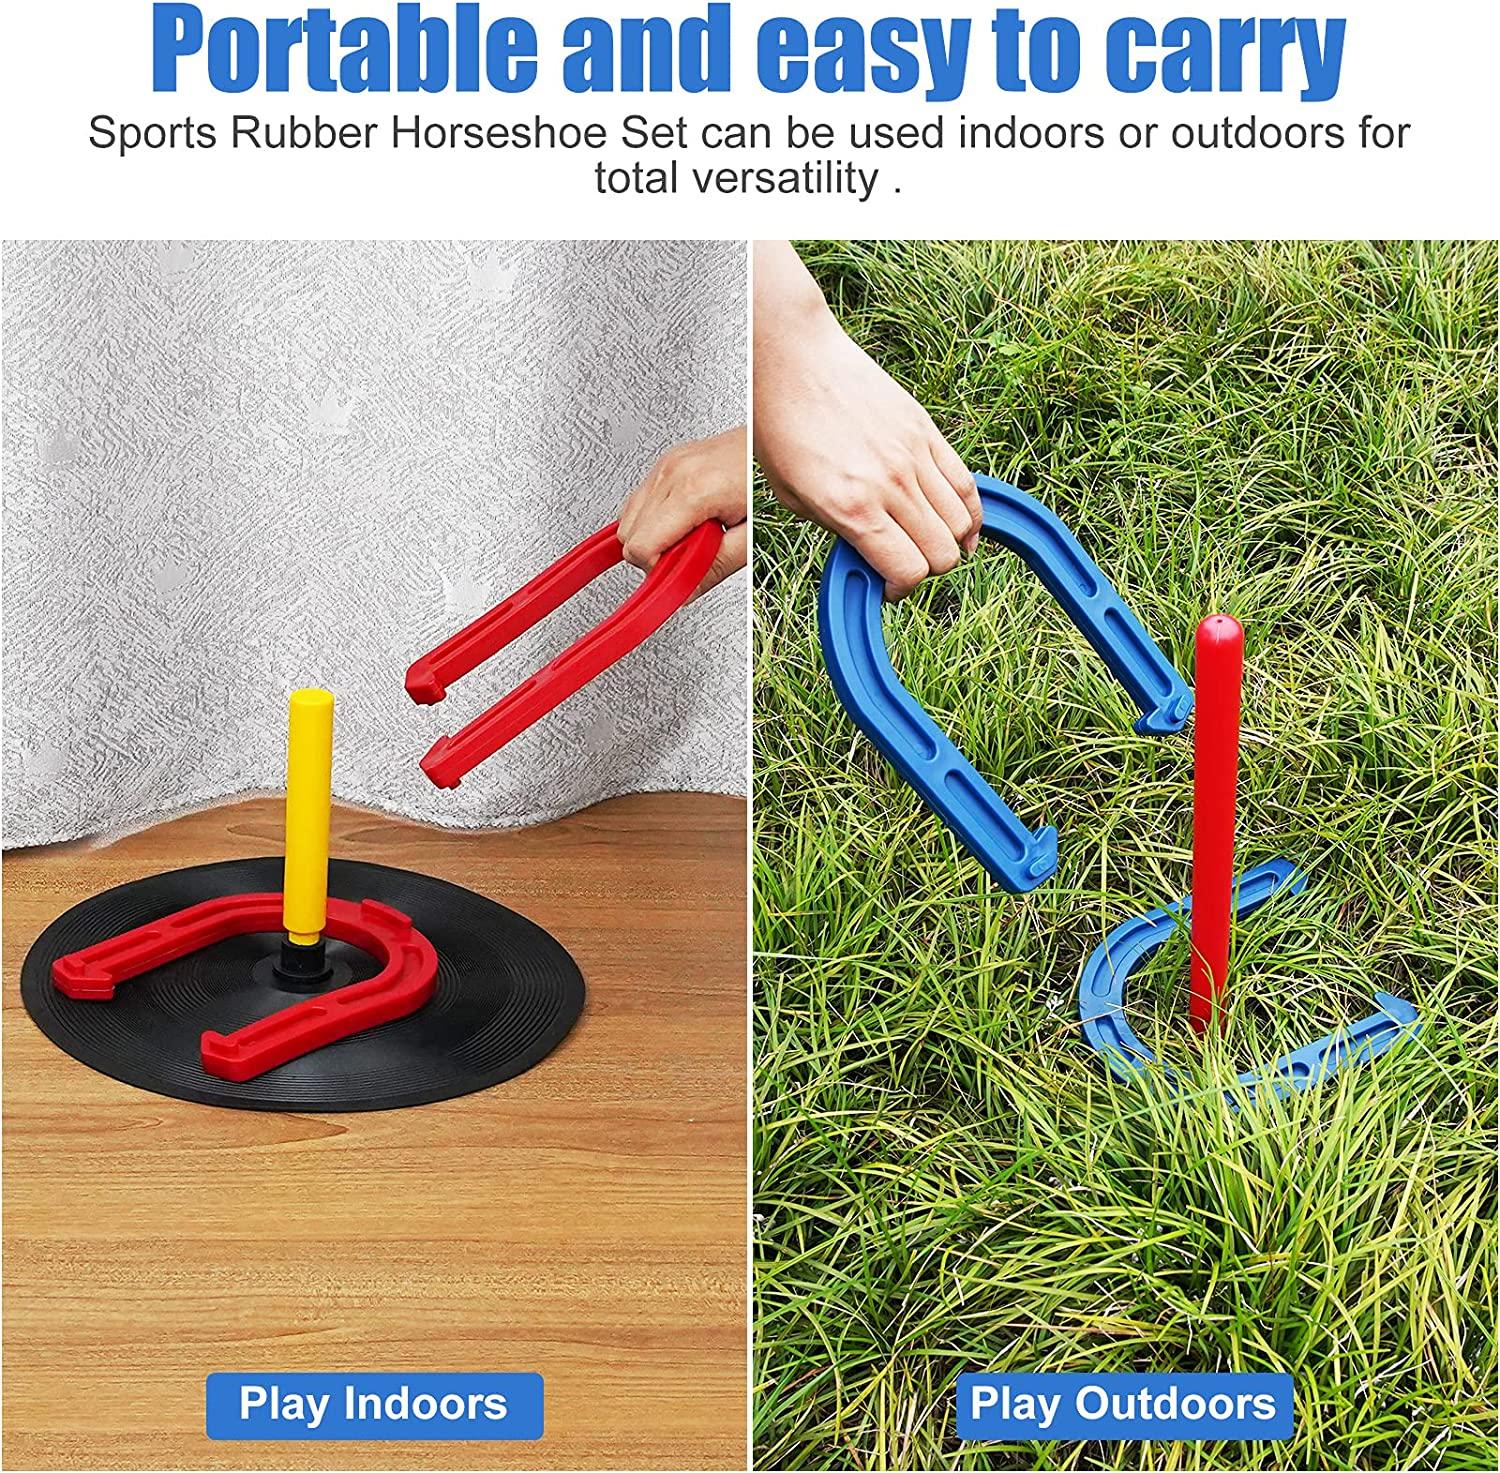 How to play the game of Horseshoes. Set up, directions, instructions and  scoring for the game of horse shoes…